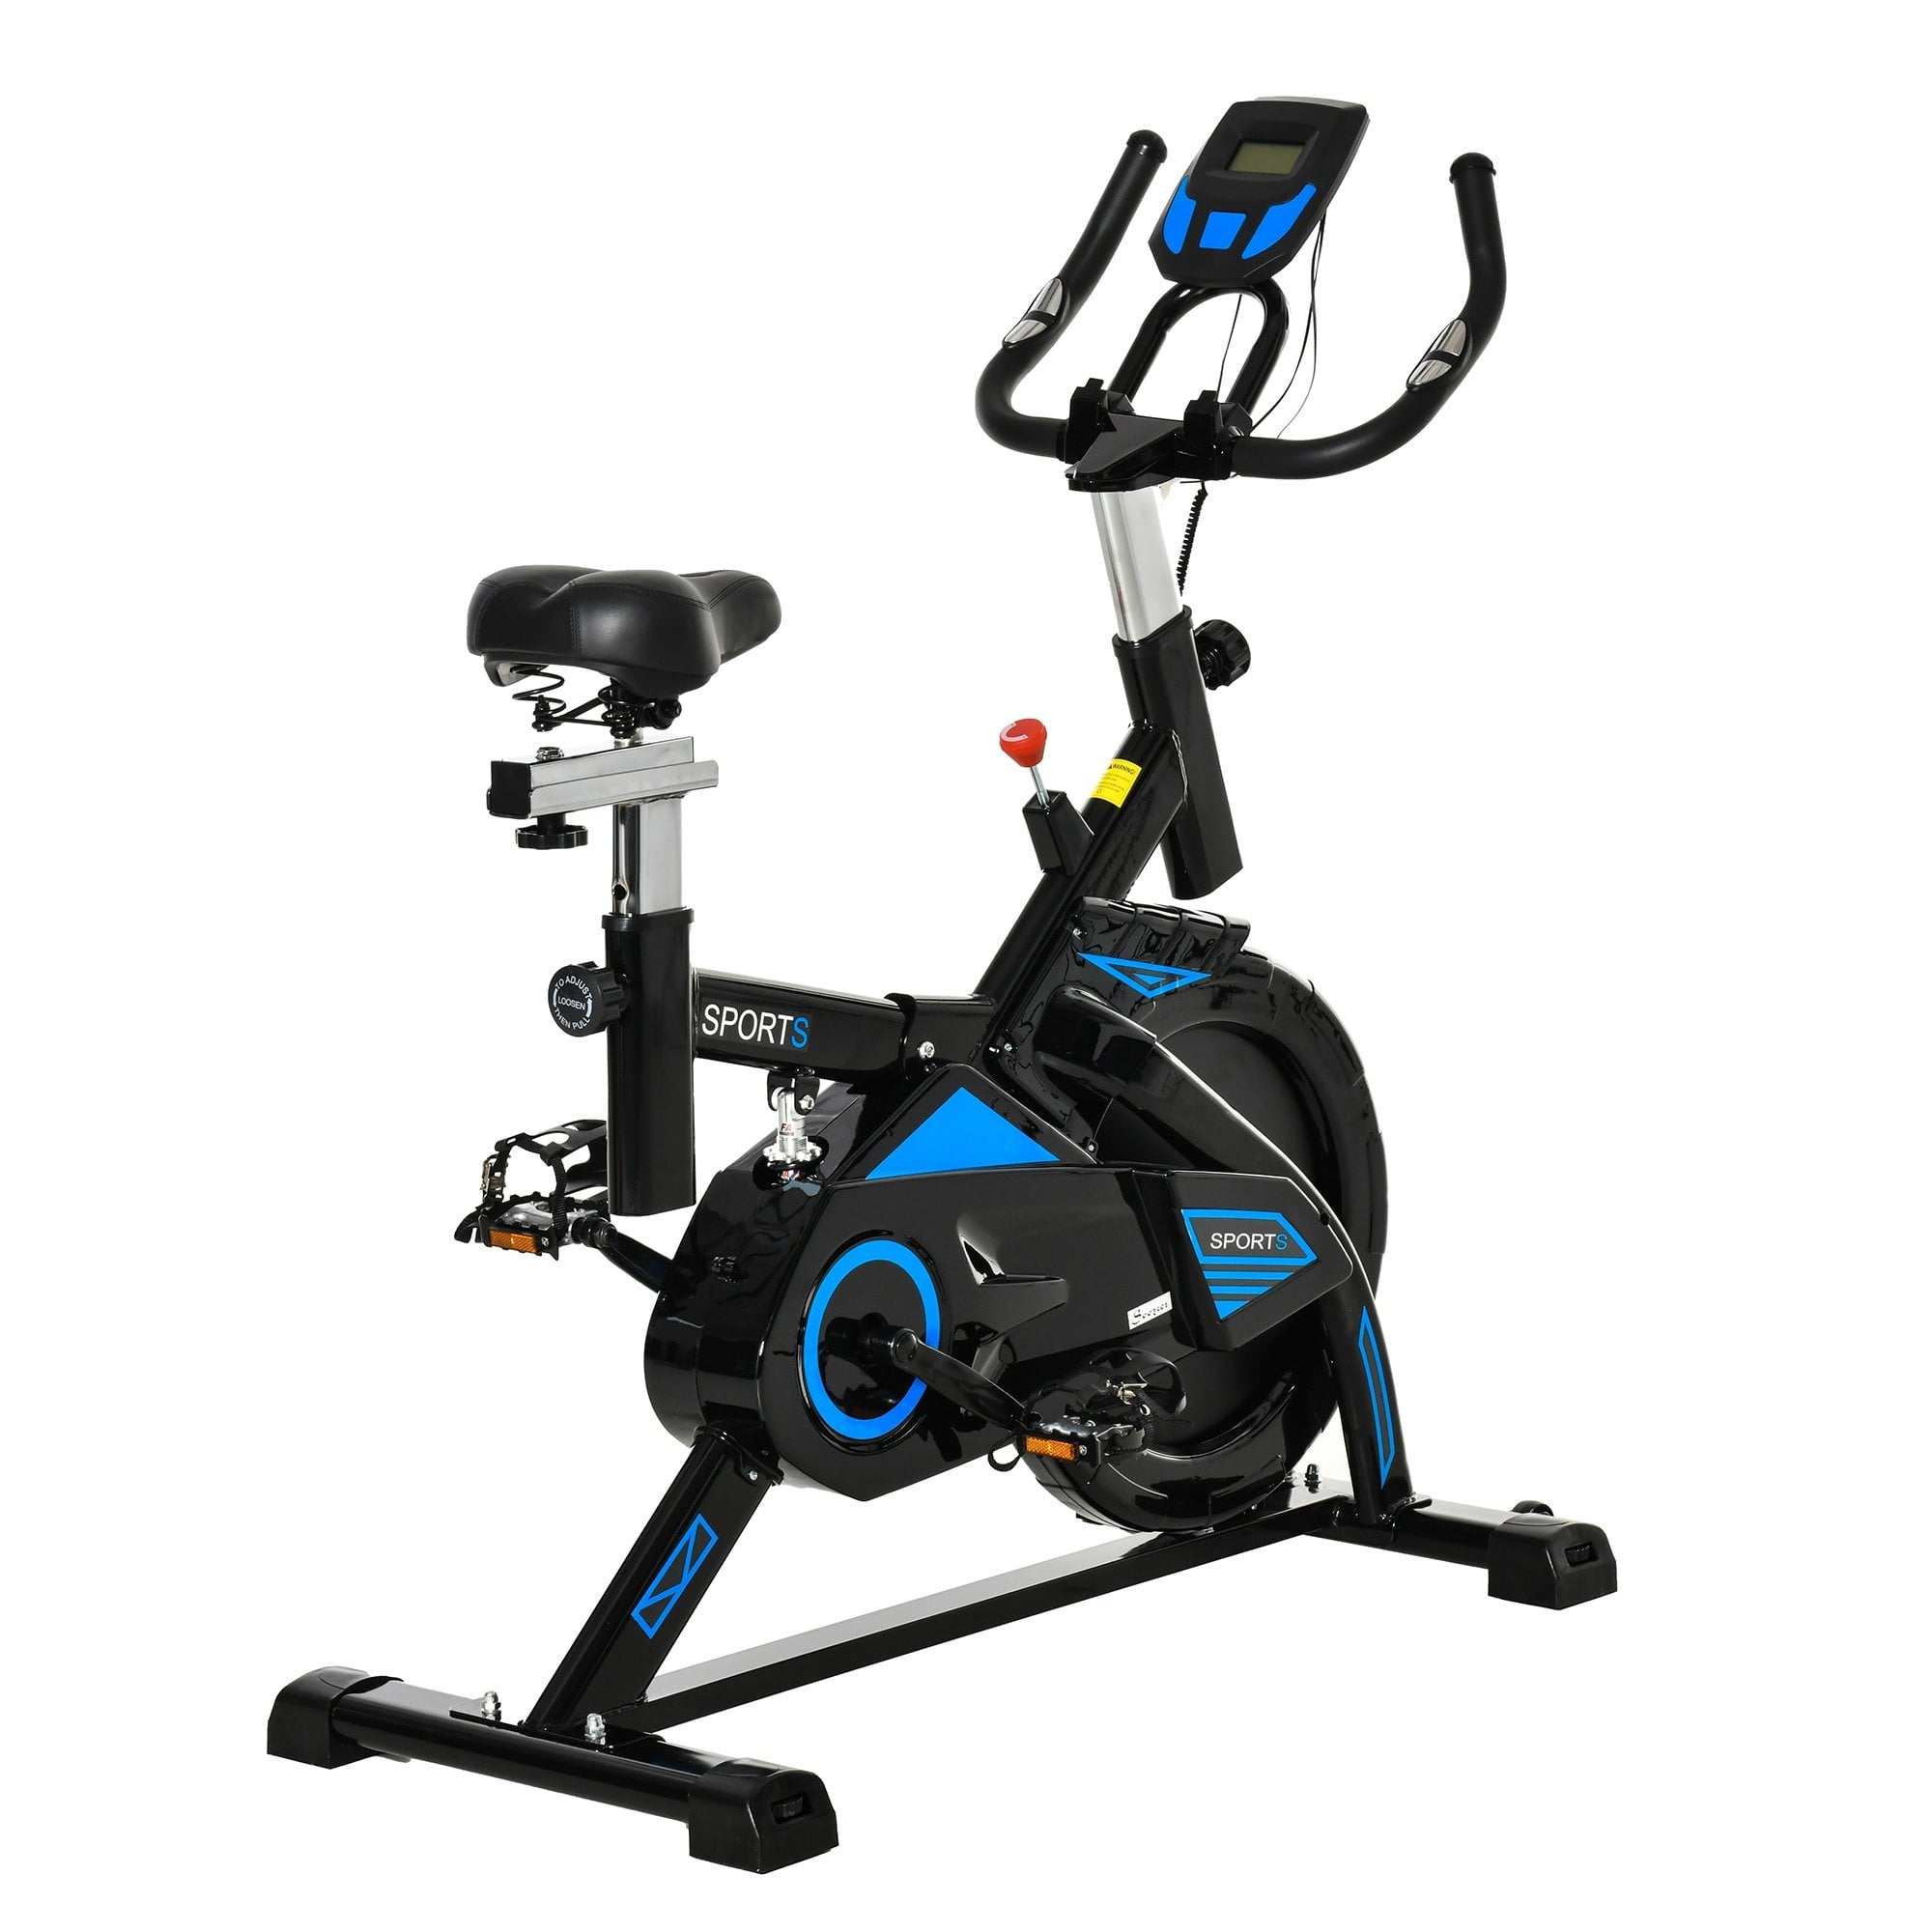 Stationary Exercise Bike with iPad Holder - LCD Monitor - Comfortable Seat - Indoor Cycling Training Bike - 13KG Flywheel - Black - MAXFIT  | TJ Hughe